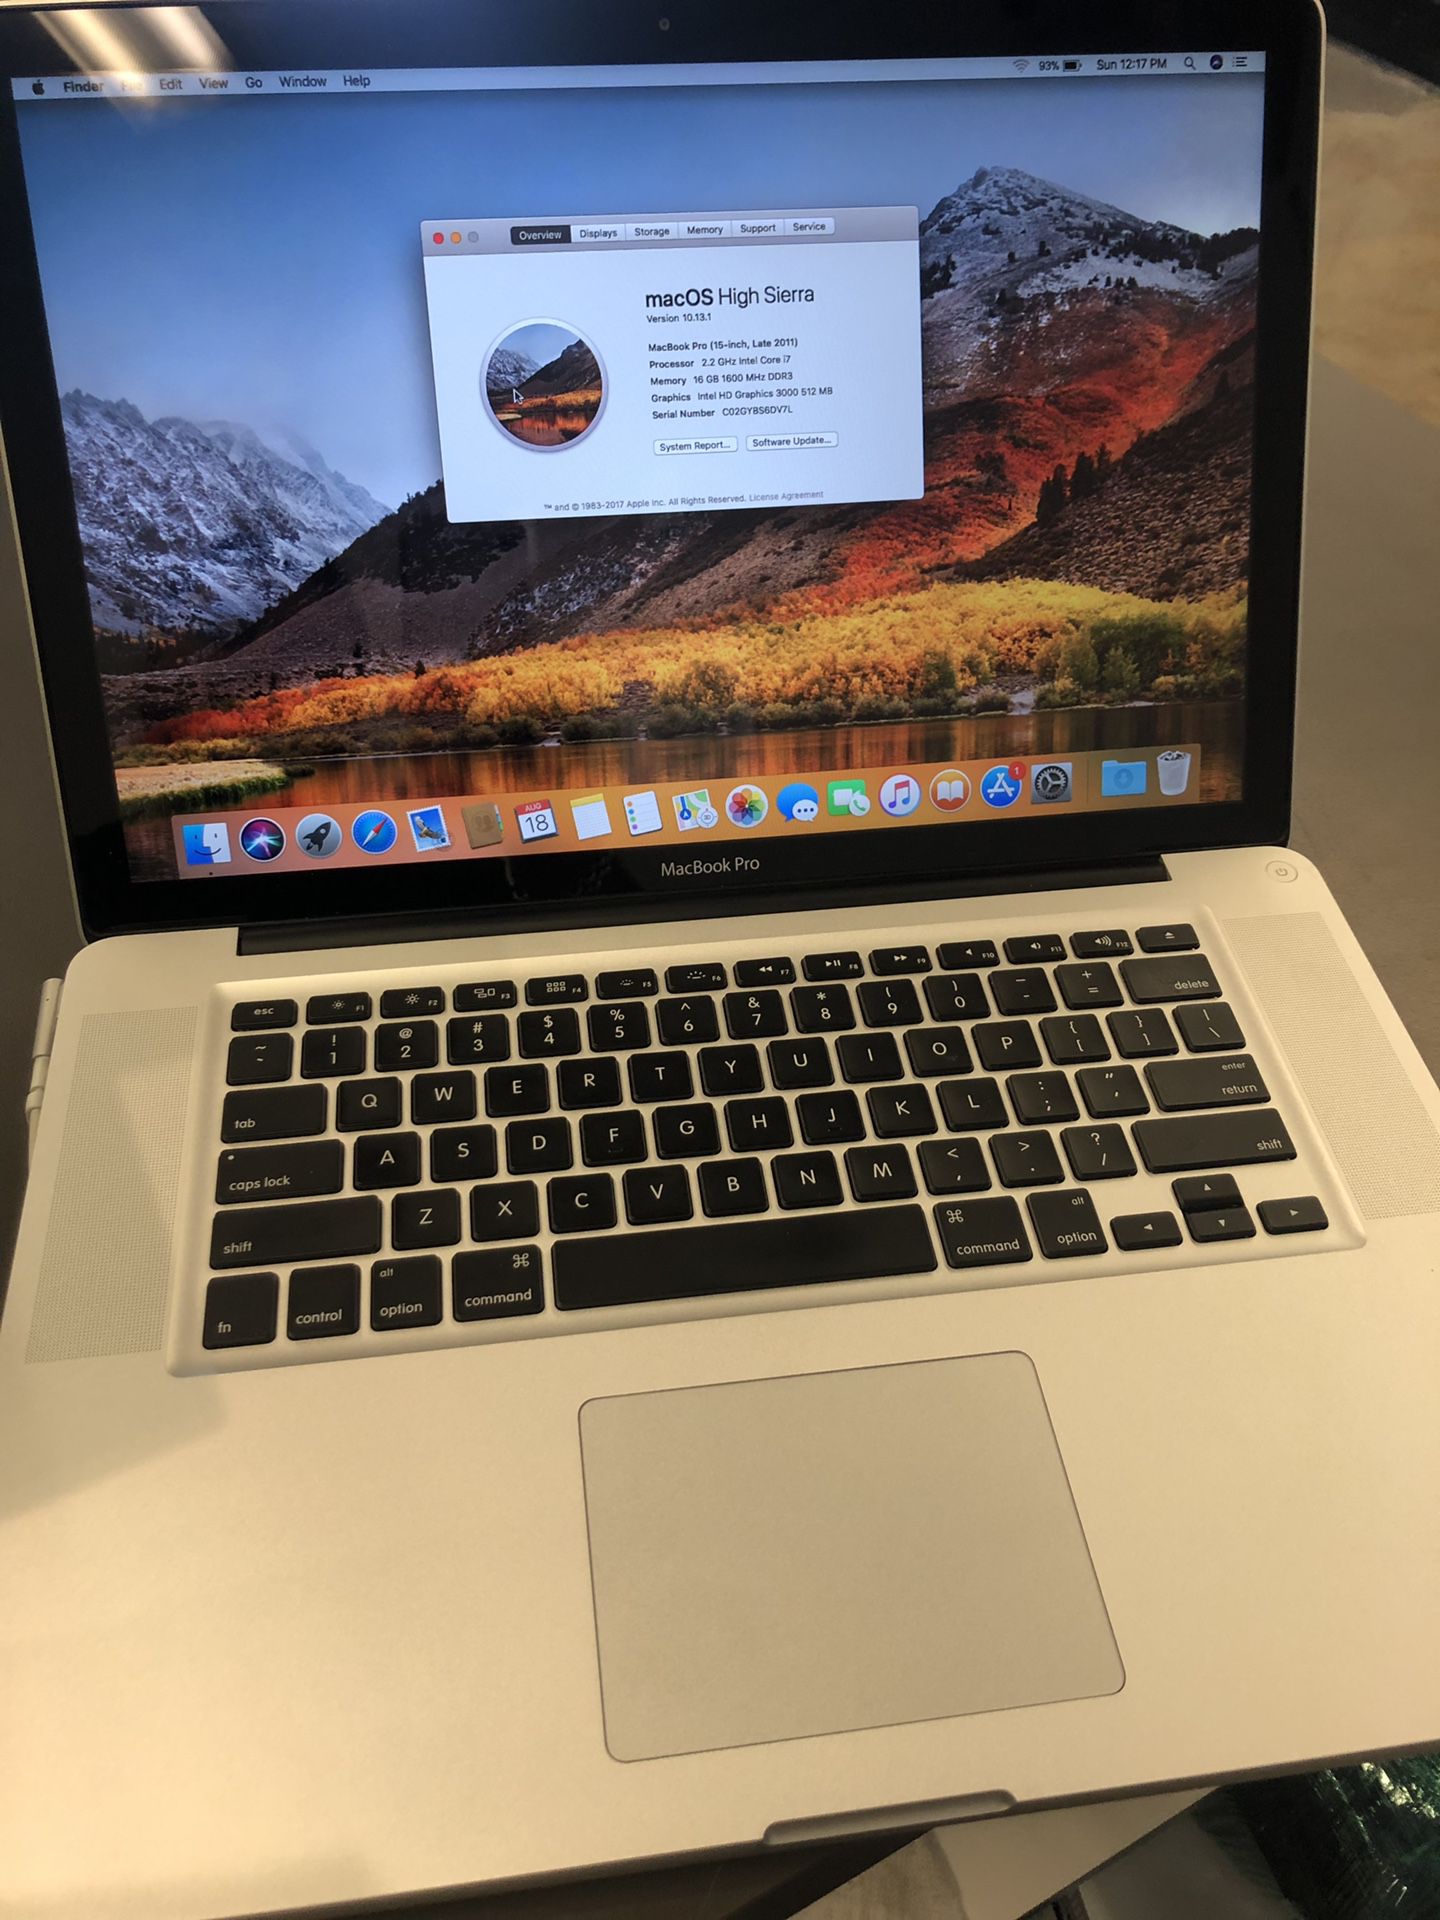 MacBook Pro late 2011 15” Core i7 16gb Ram 500gb memory w charger no trades pick up in Tacoma